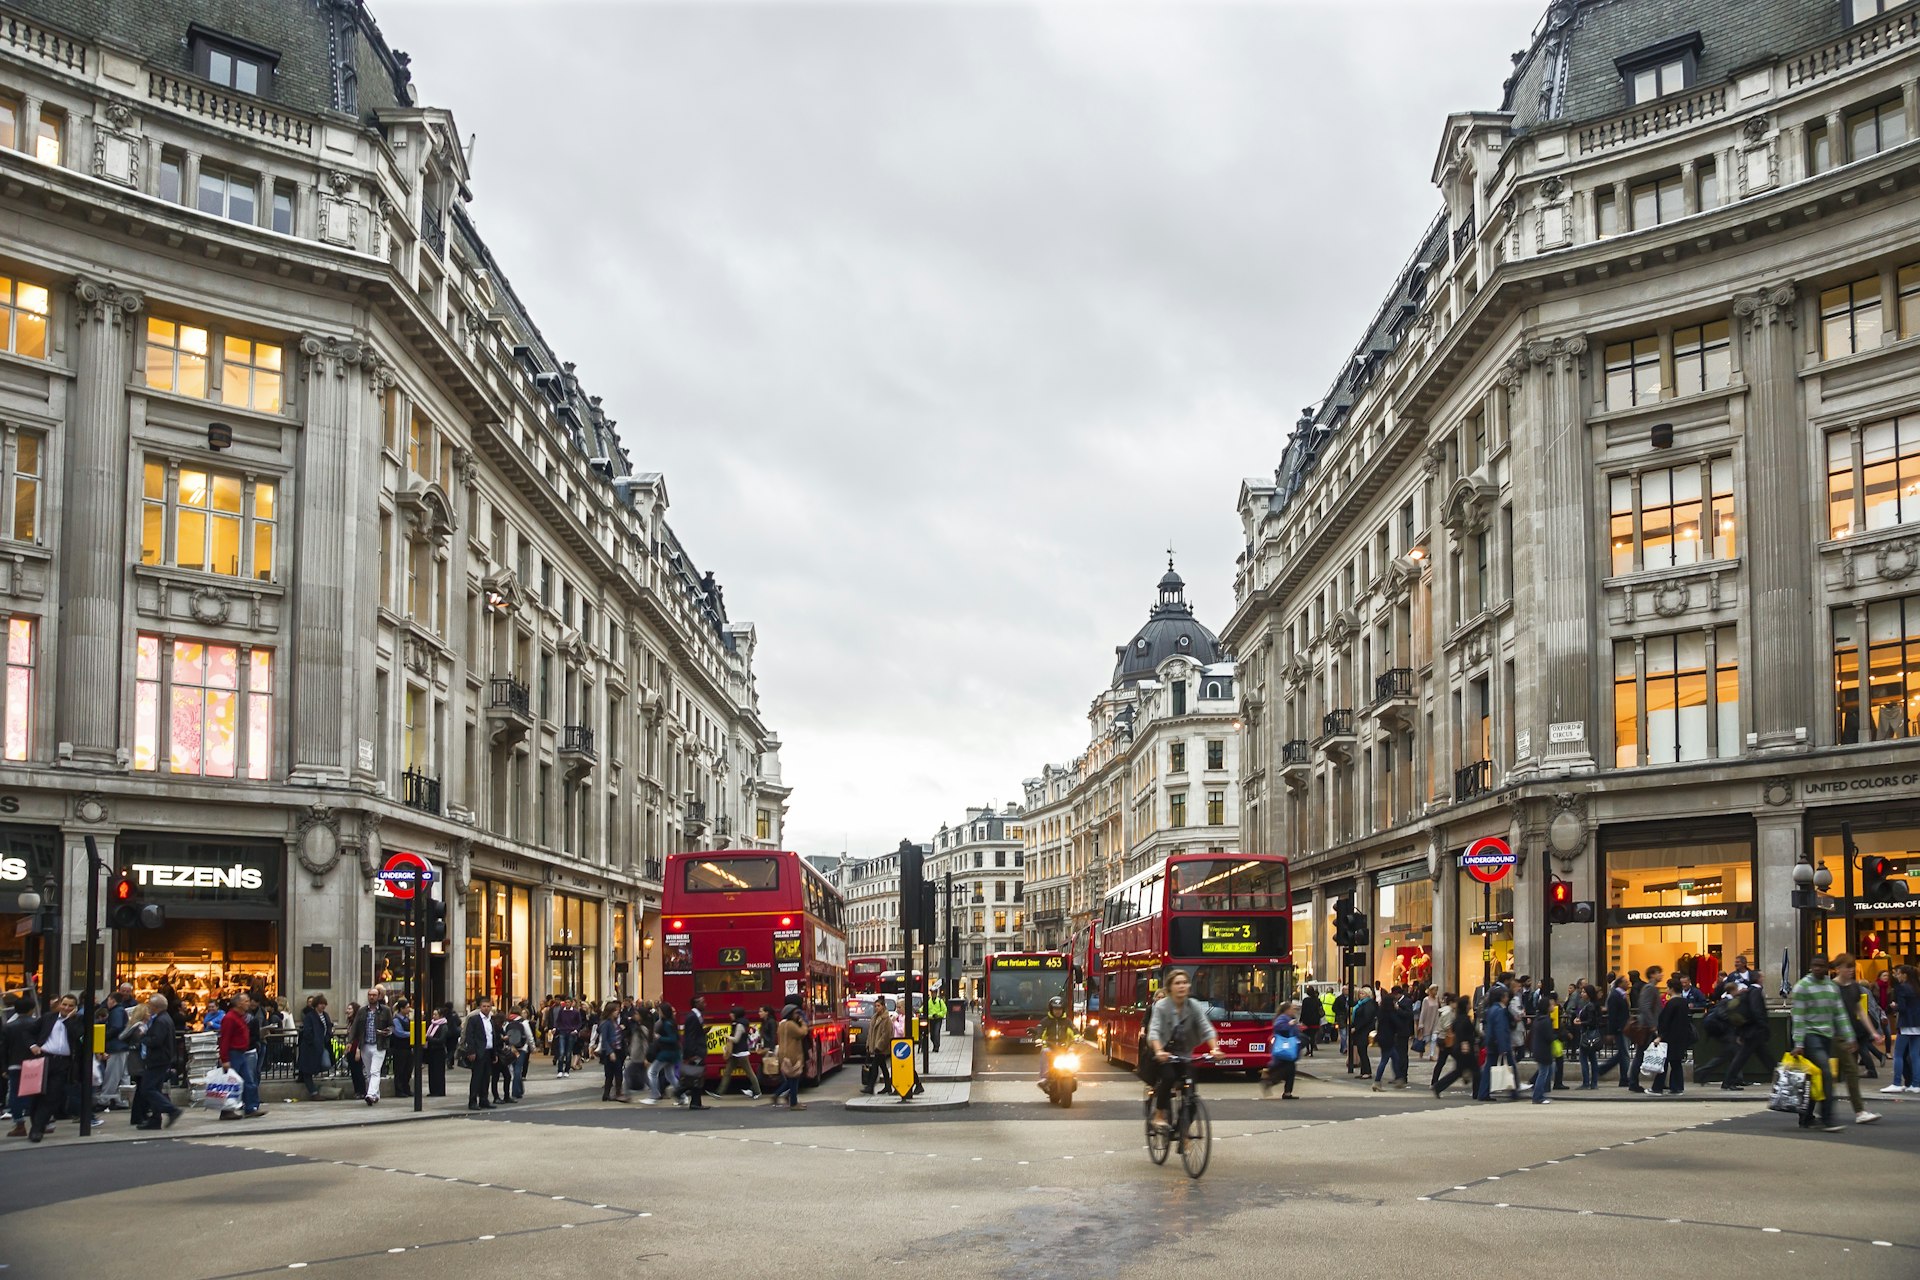 500px Photo ID: 65835065 - LONDON-SEP 20:View of Oxford Street on September 20, 2011 in London. Oxford Street is a major road in the West End of London, UK. It is Europe's busiest shopping street, and as of 2011 had approximately 300 shops